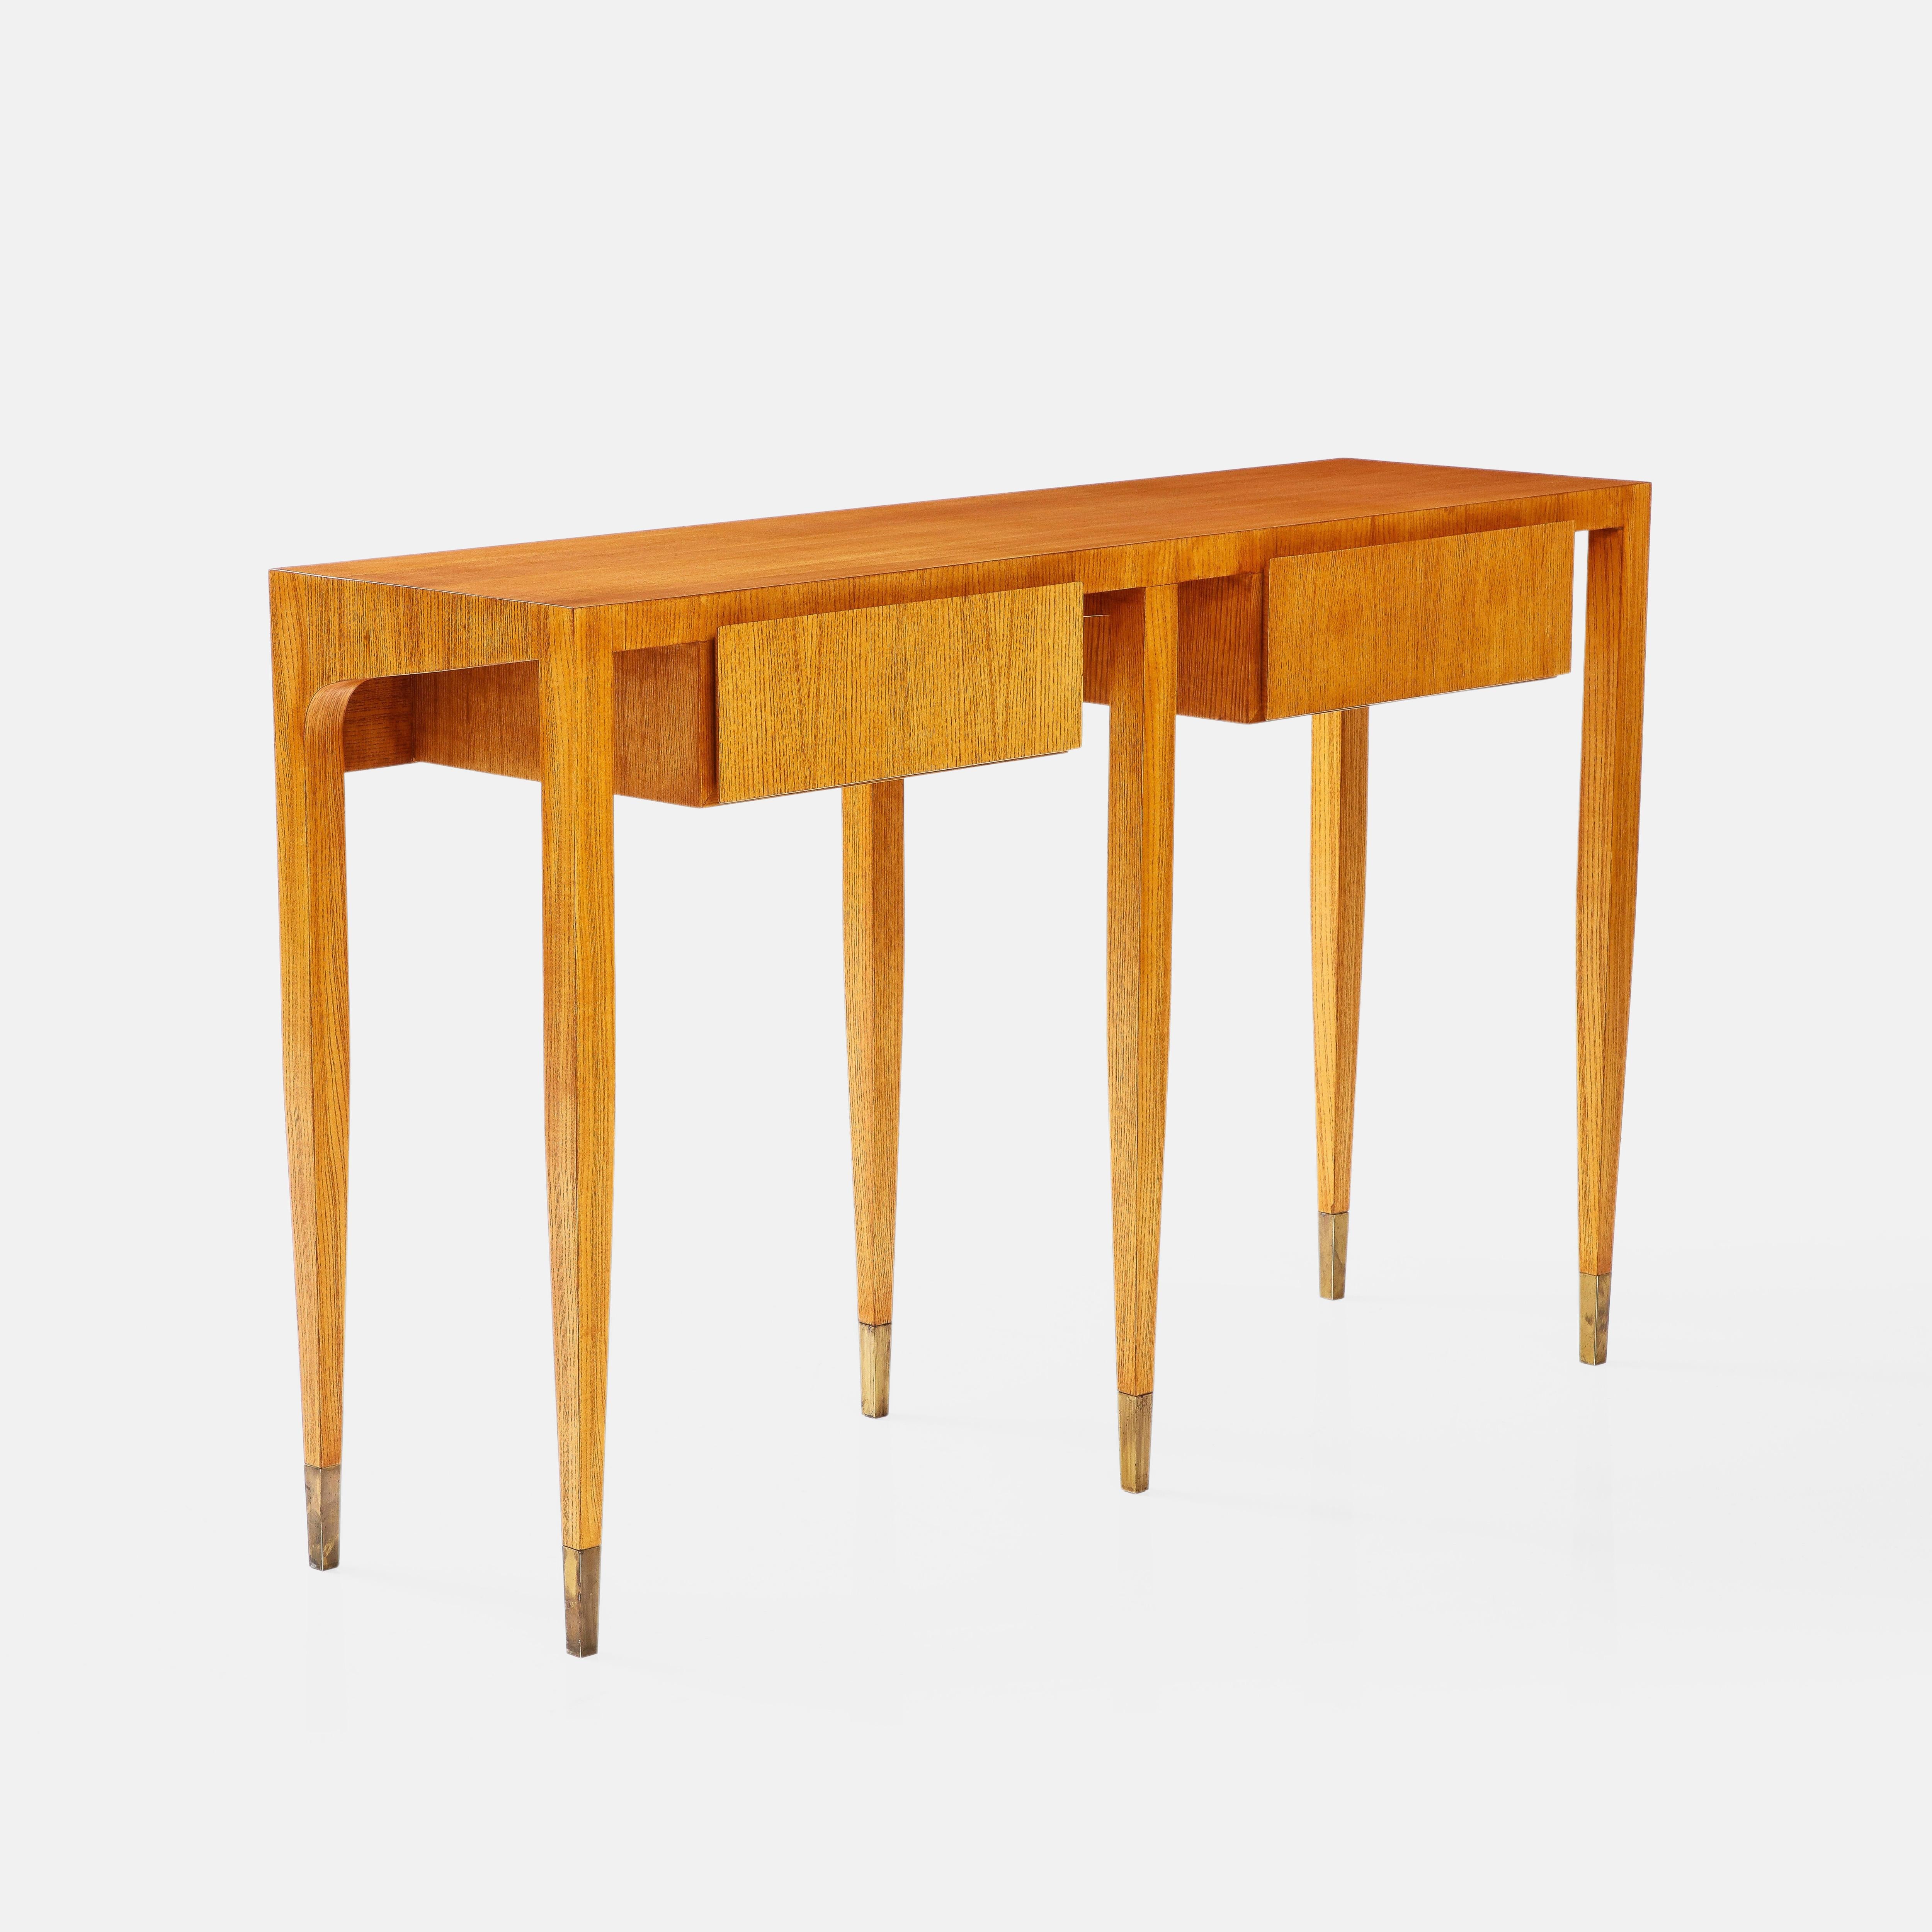 Gio Ponti for Giordano Chiesa Rare Ash Wood Console, Italy, 1950s In Good Condition For Sale In New York, NY